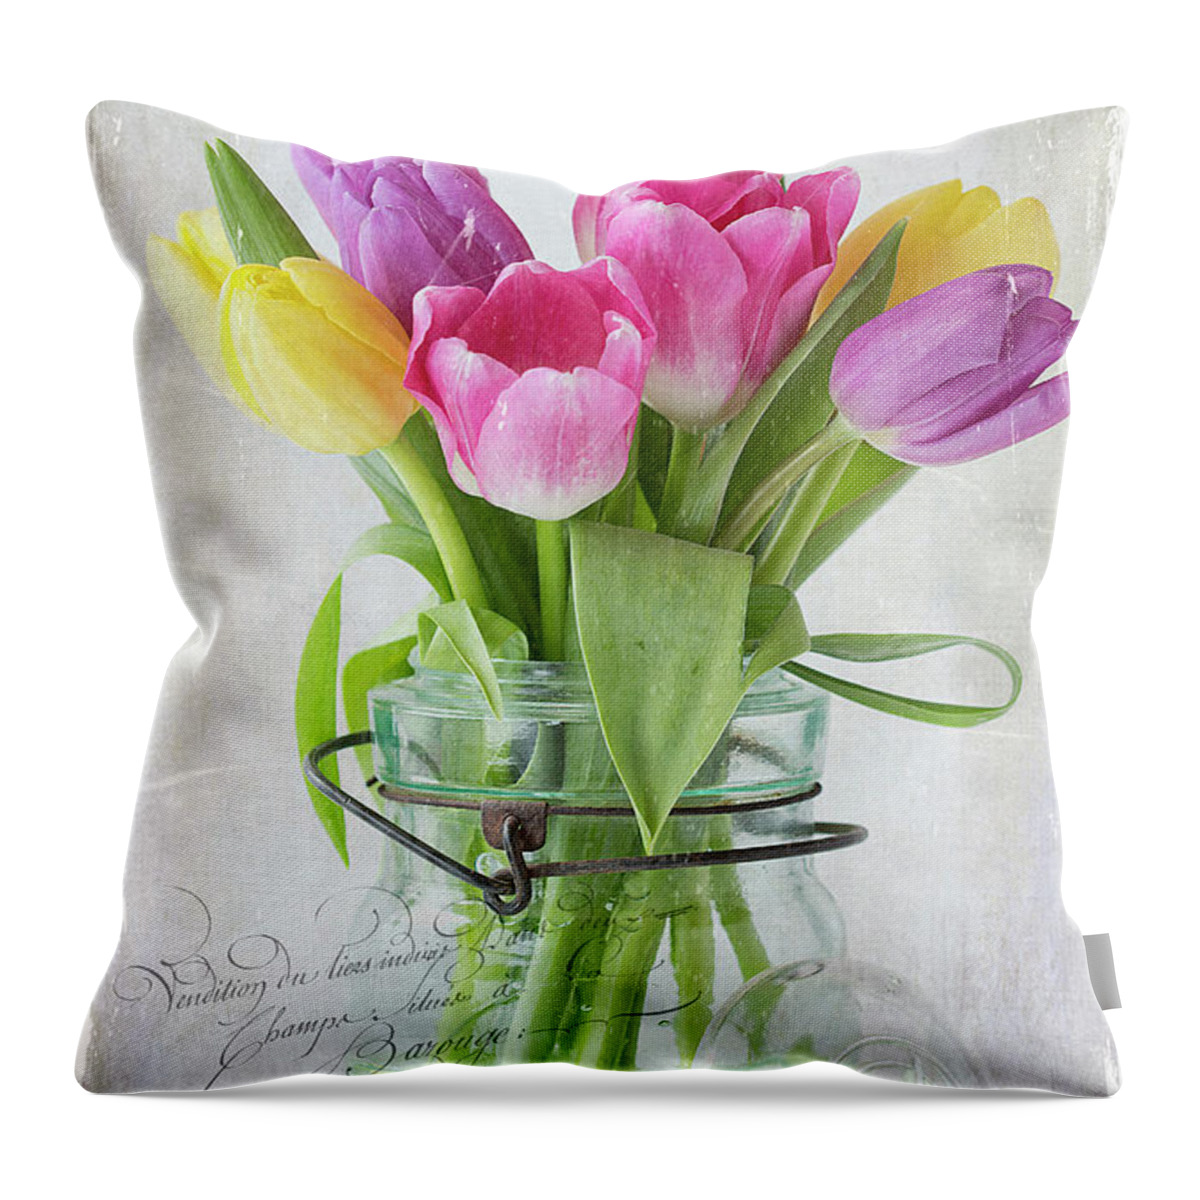 Cindi Ressler Throw Pillow featuring the photograph Tulips in a Jar by Cindi Ressler